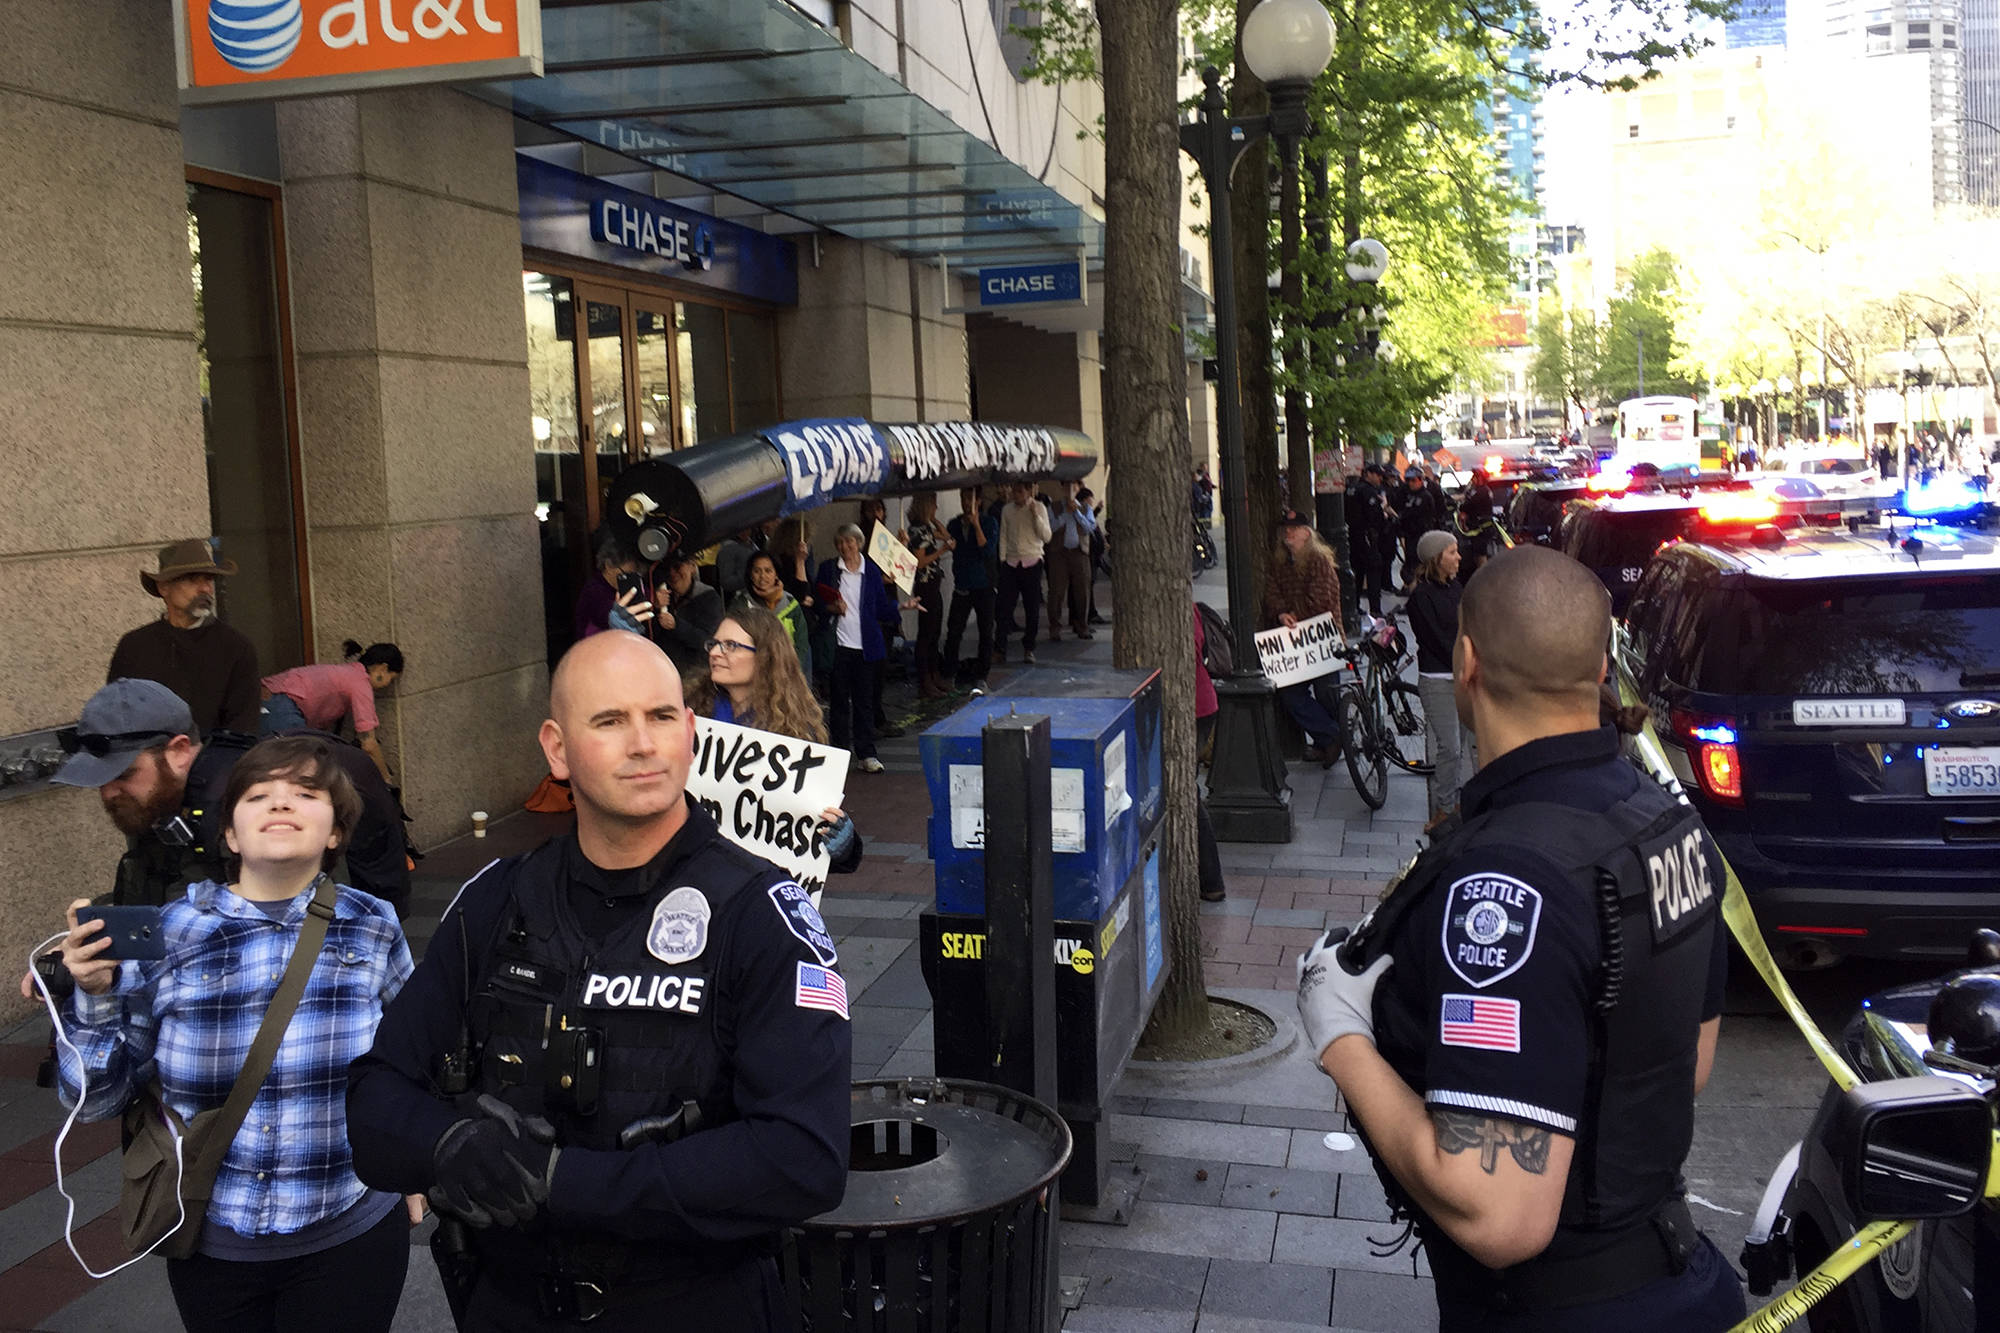 Police stand outside 4th Ave Chase Bank branch during May 8 anti-pipeline action. Photo by Sara Bernard